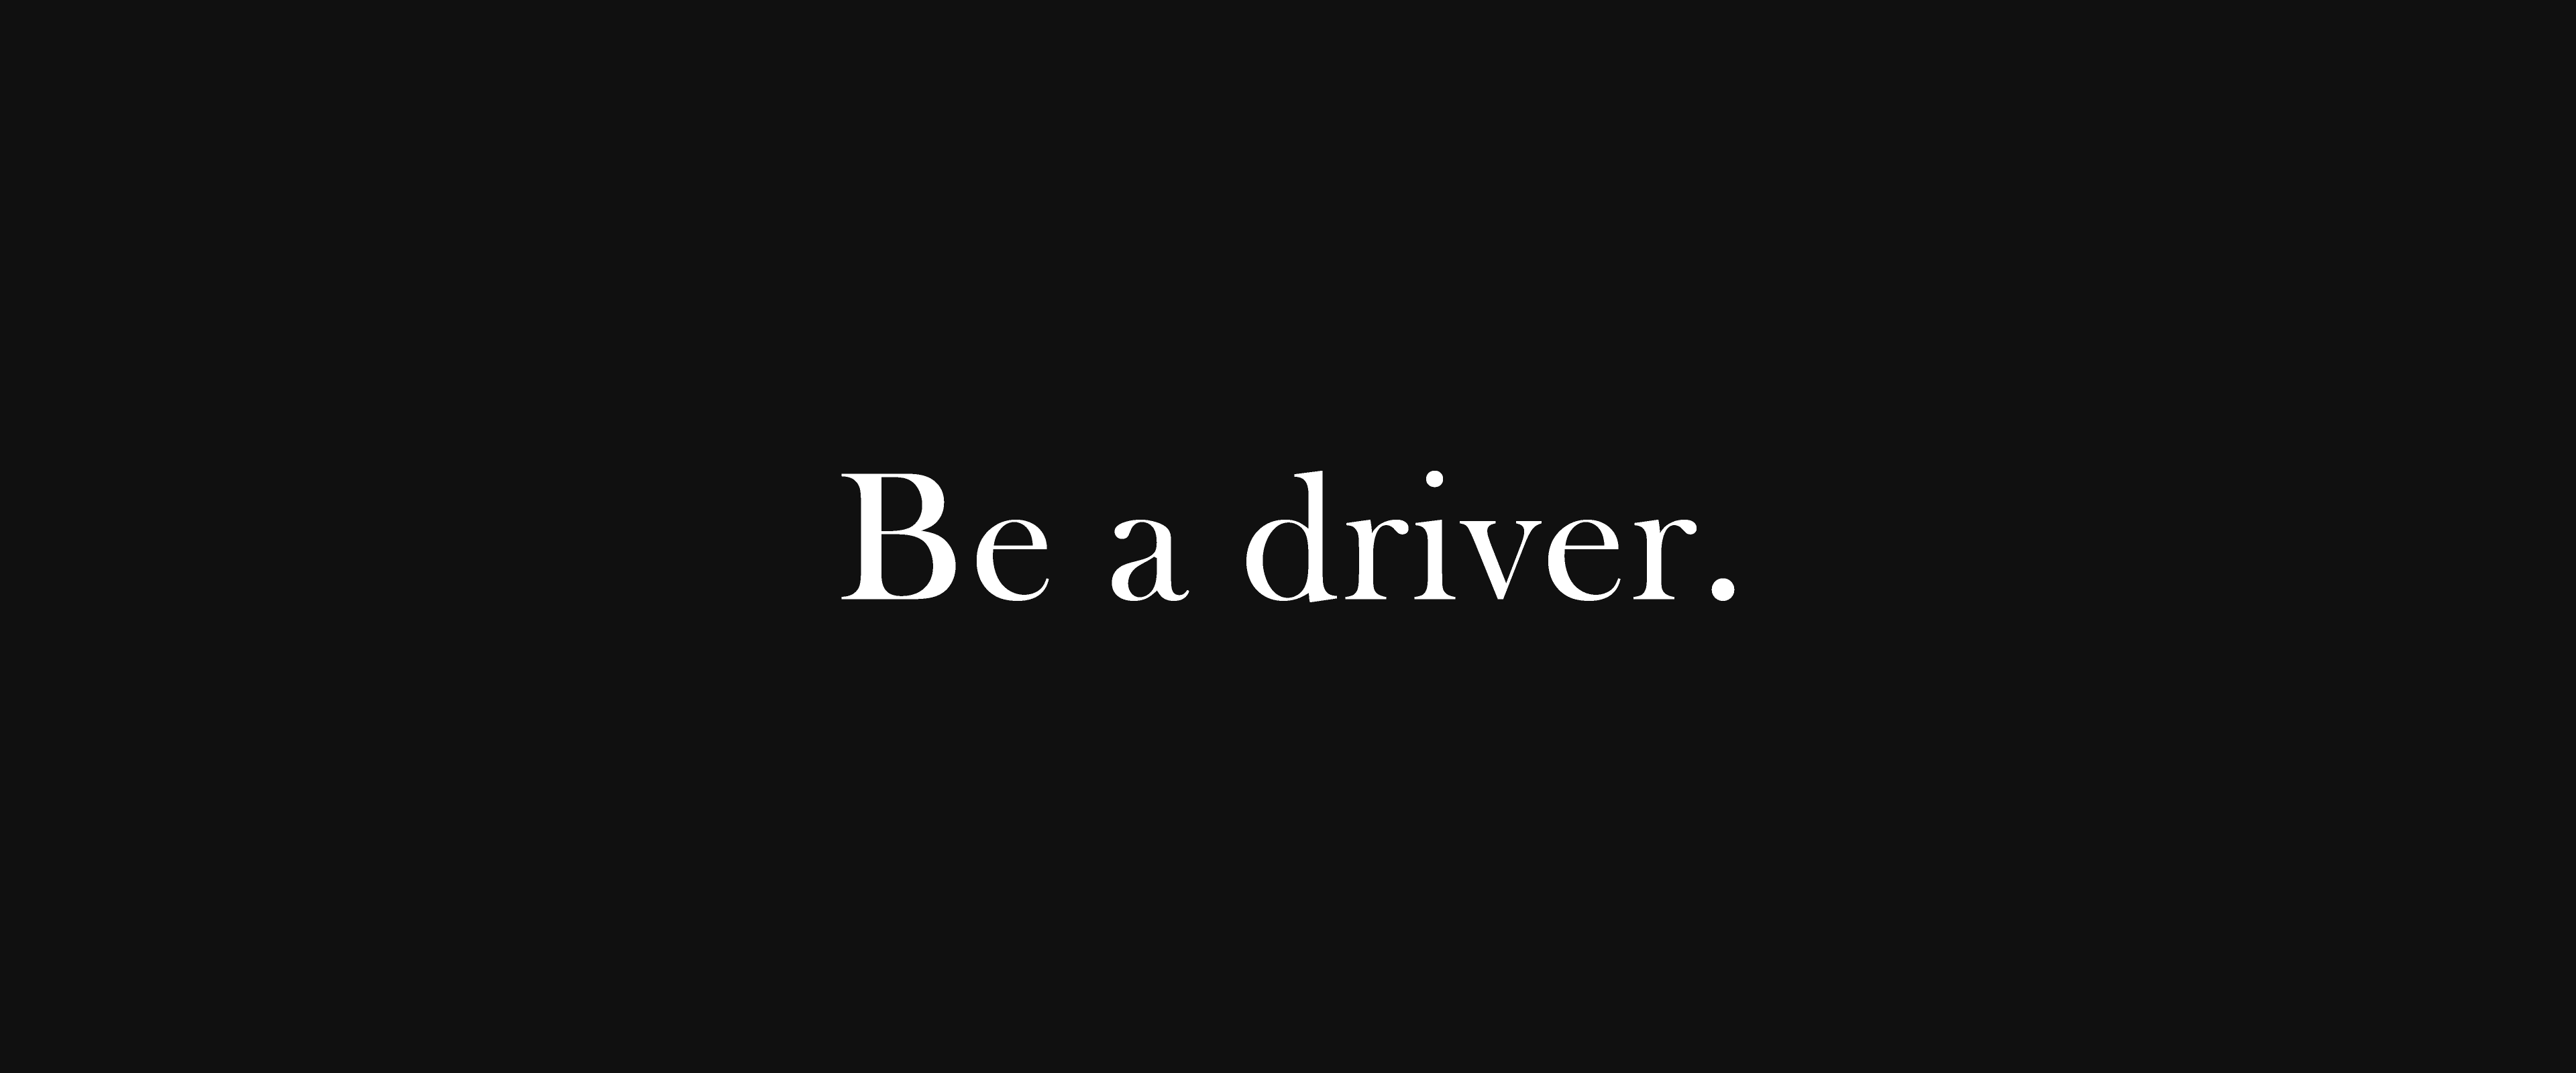 Be a driver